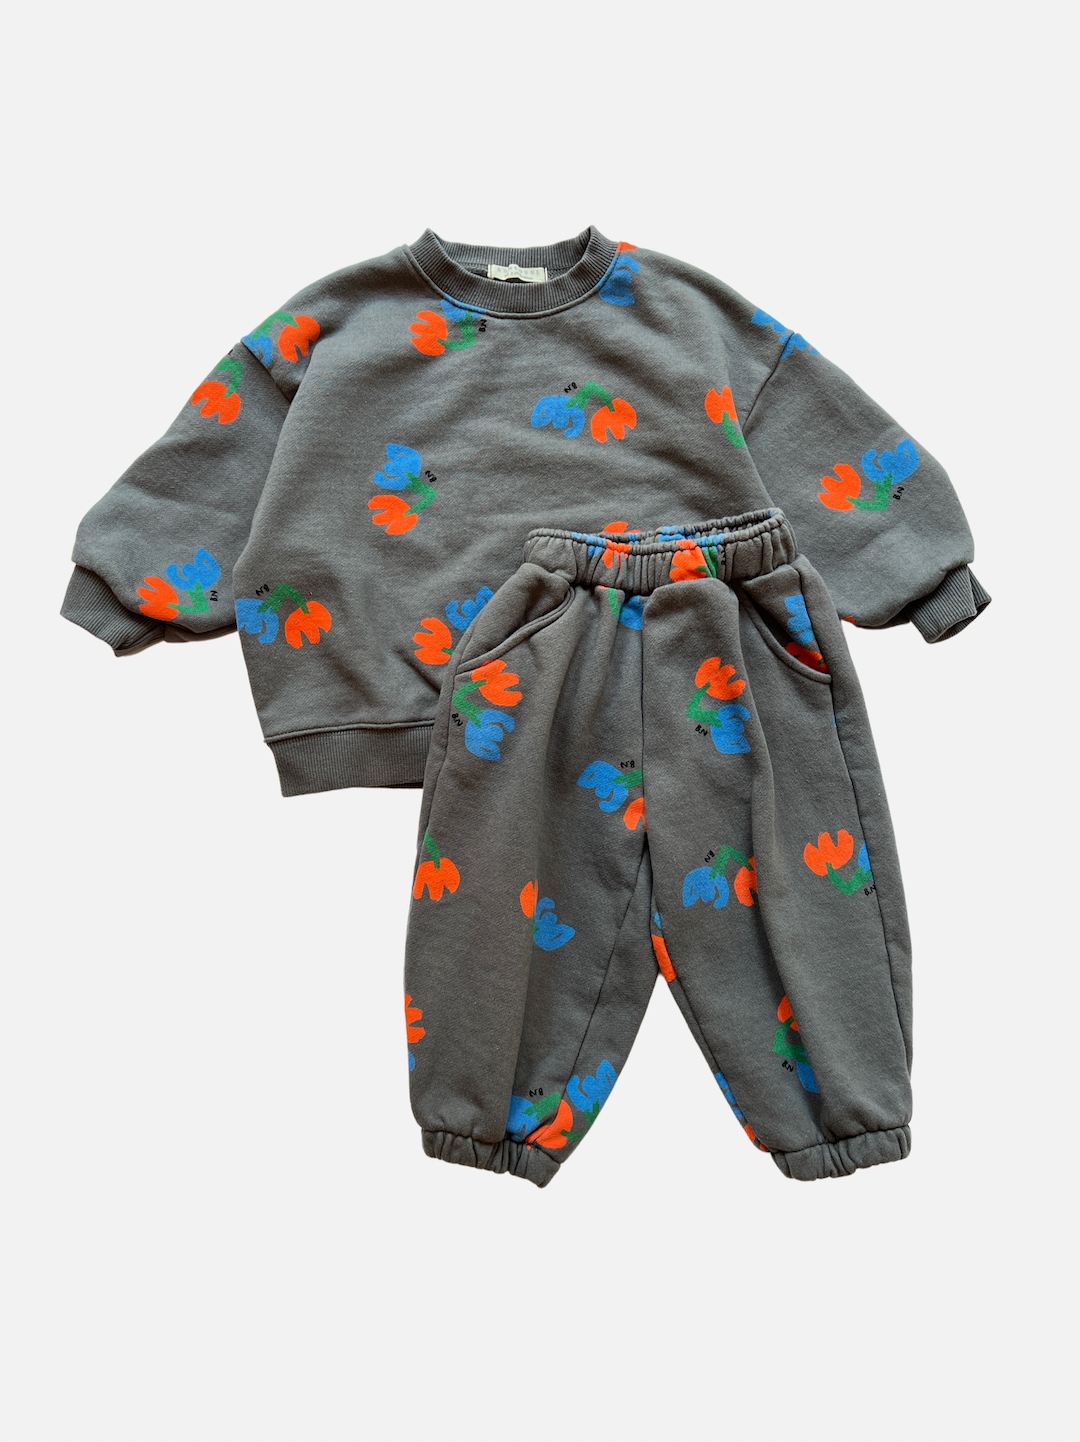 Set of kids' sweatpants and top in slate gray, printed with blue and orange flowers, front view